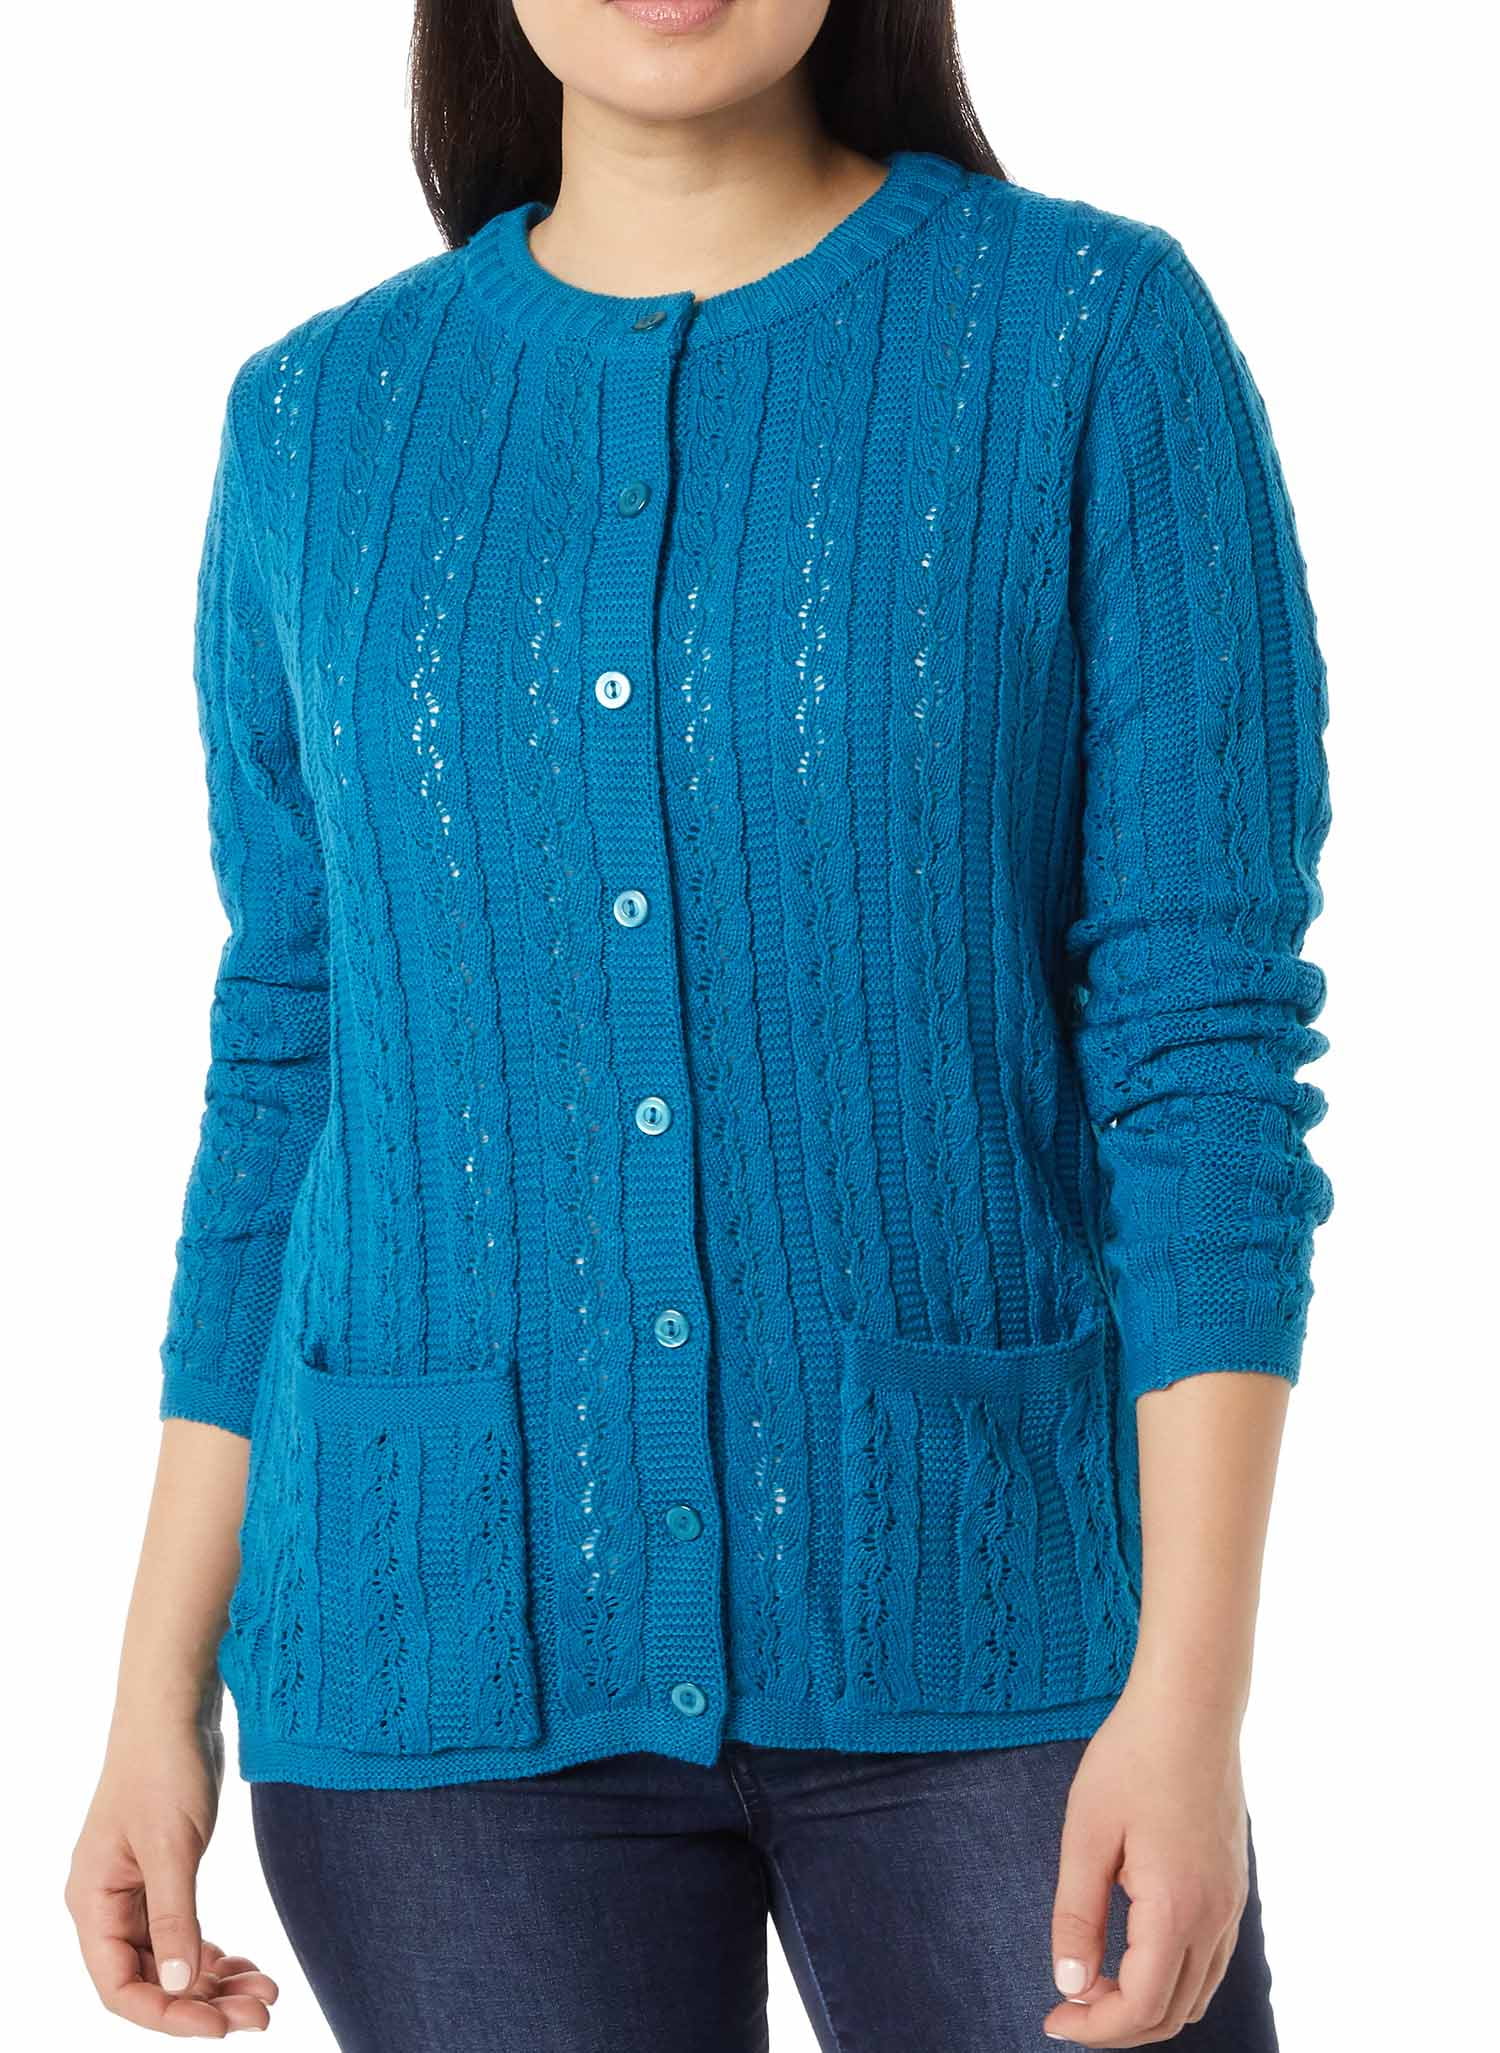 Blue Ocean Cable Cardigan Sweater